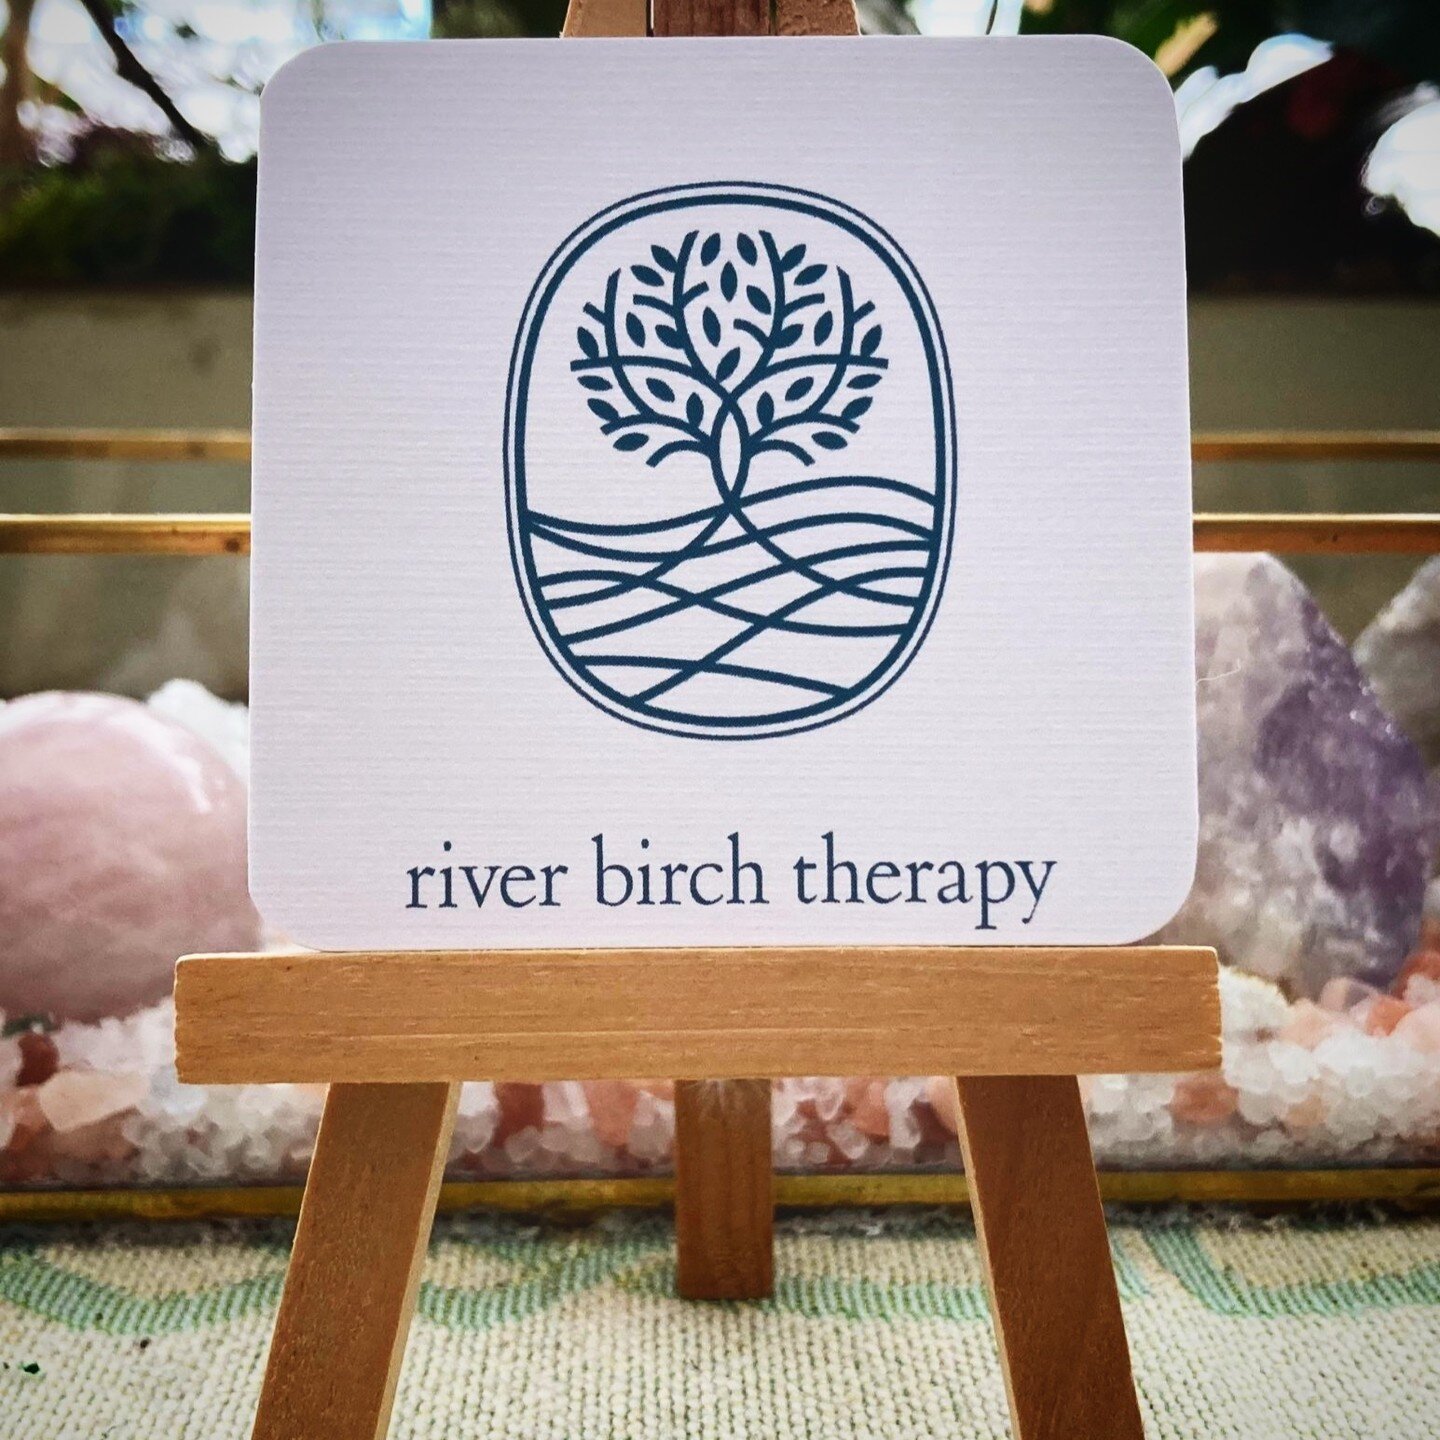 🌿River Birch Therapy is excited to announce that it will be hosting an Open House &amp; Art Studio from noon - 1pm on on Sunday, June 5th, 2022 for a special celebration. River Birch will be celebrating its 1st Anniversary, which also happens to be 